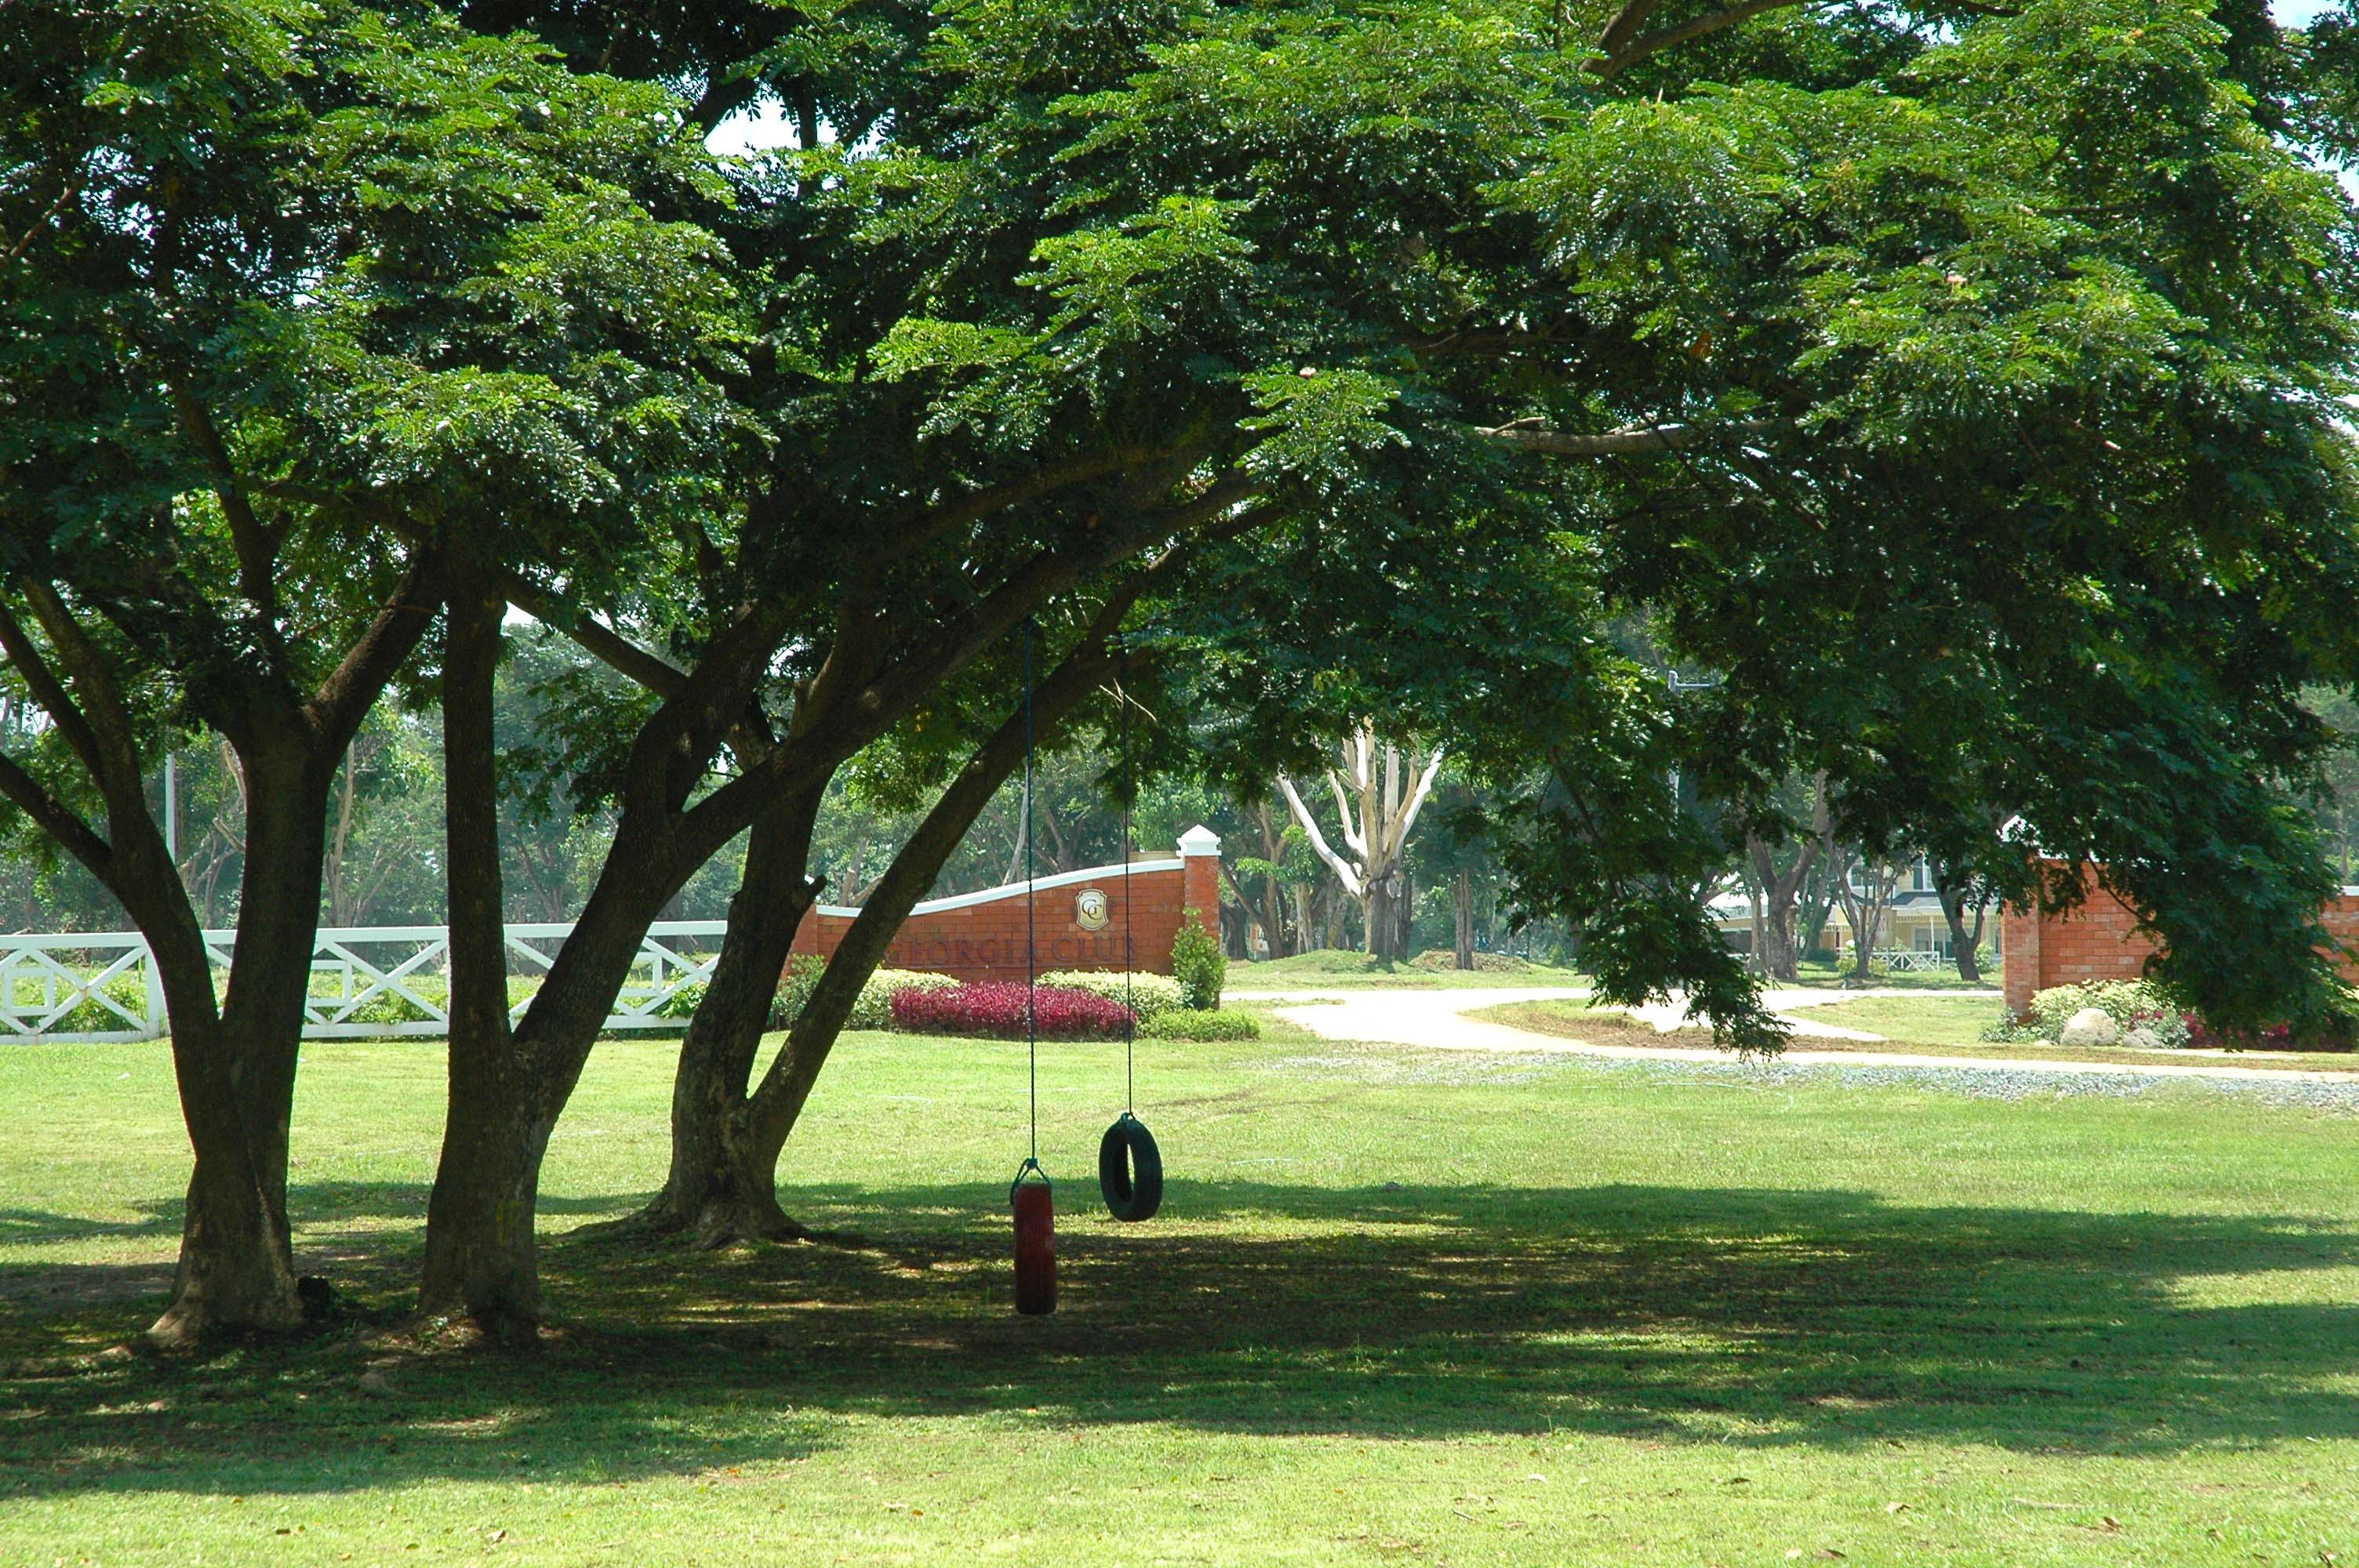 Image of green spaces within the Southern American-Inspired community can be seen in the Philippines